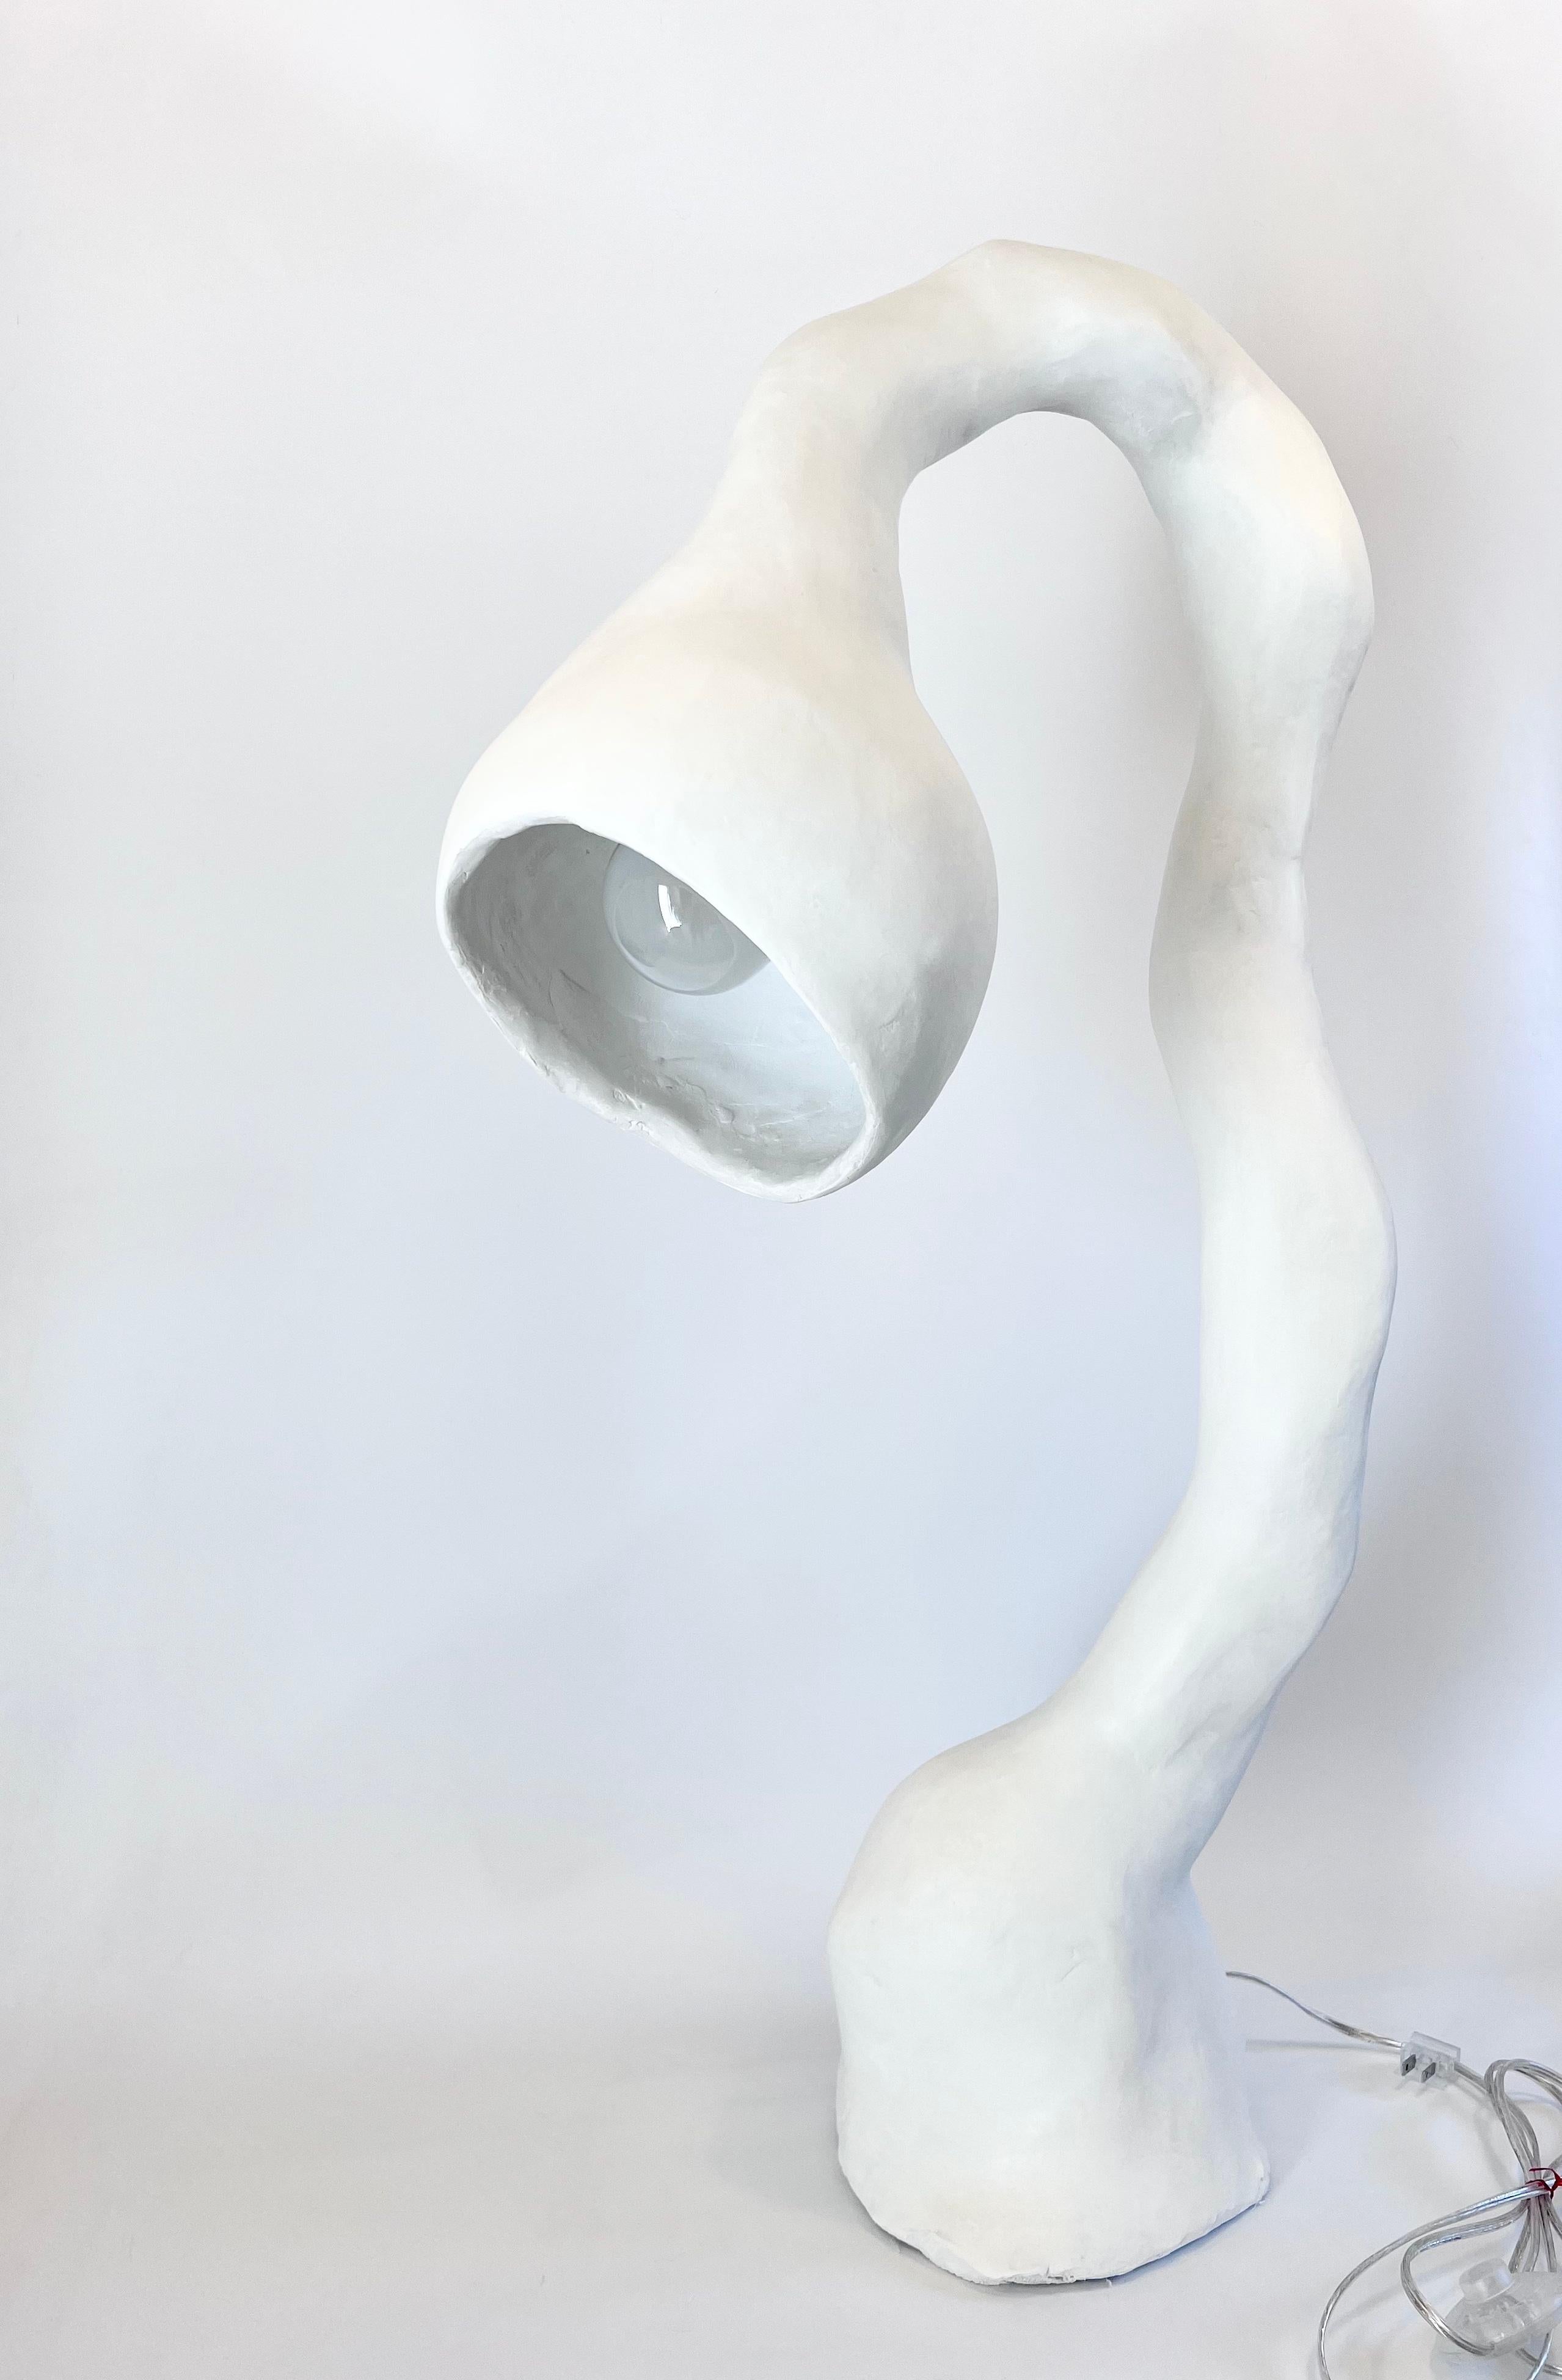 N.005 Floor Lamp from the Biomorphic Series by Studio Chora is inspired by the nature of human experience. This is a second-generation light sculpture that is hand crafted from a composite plaster-based stone. The stone composite is more durable